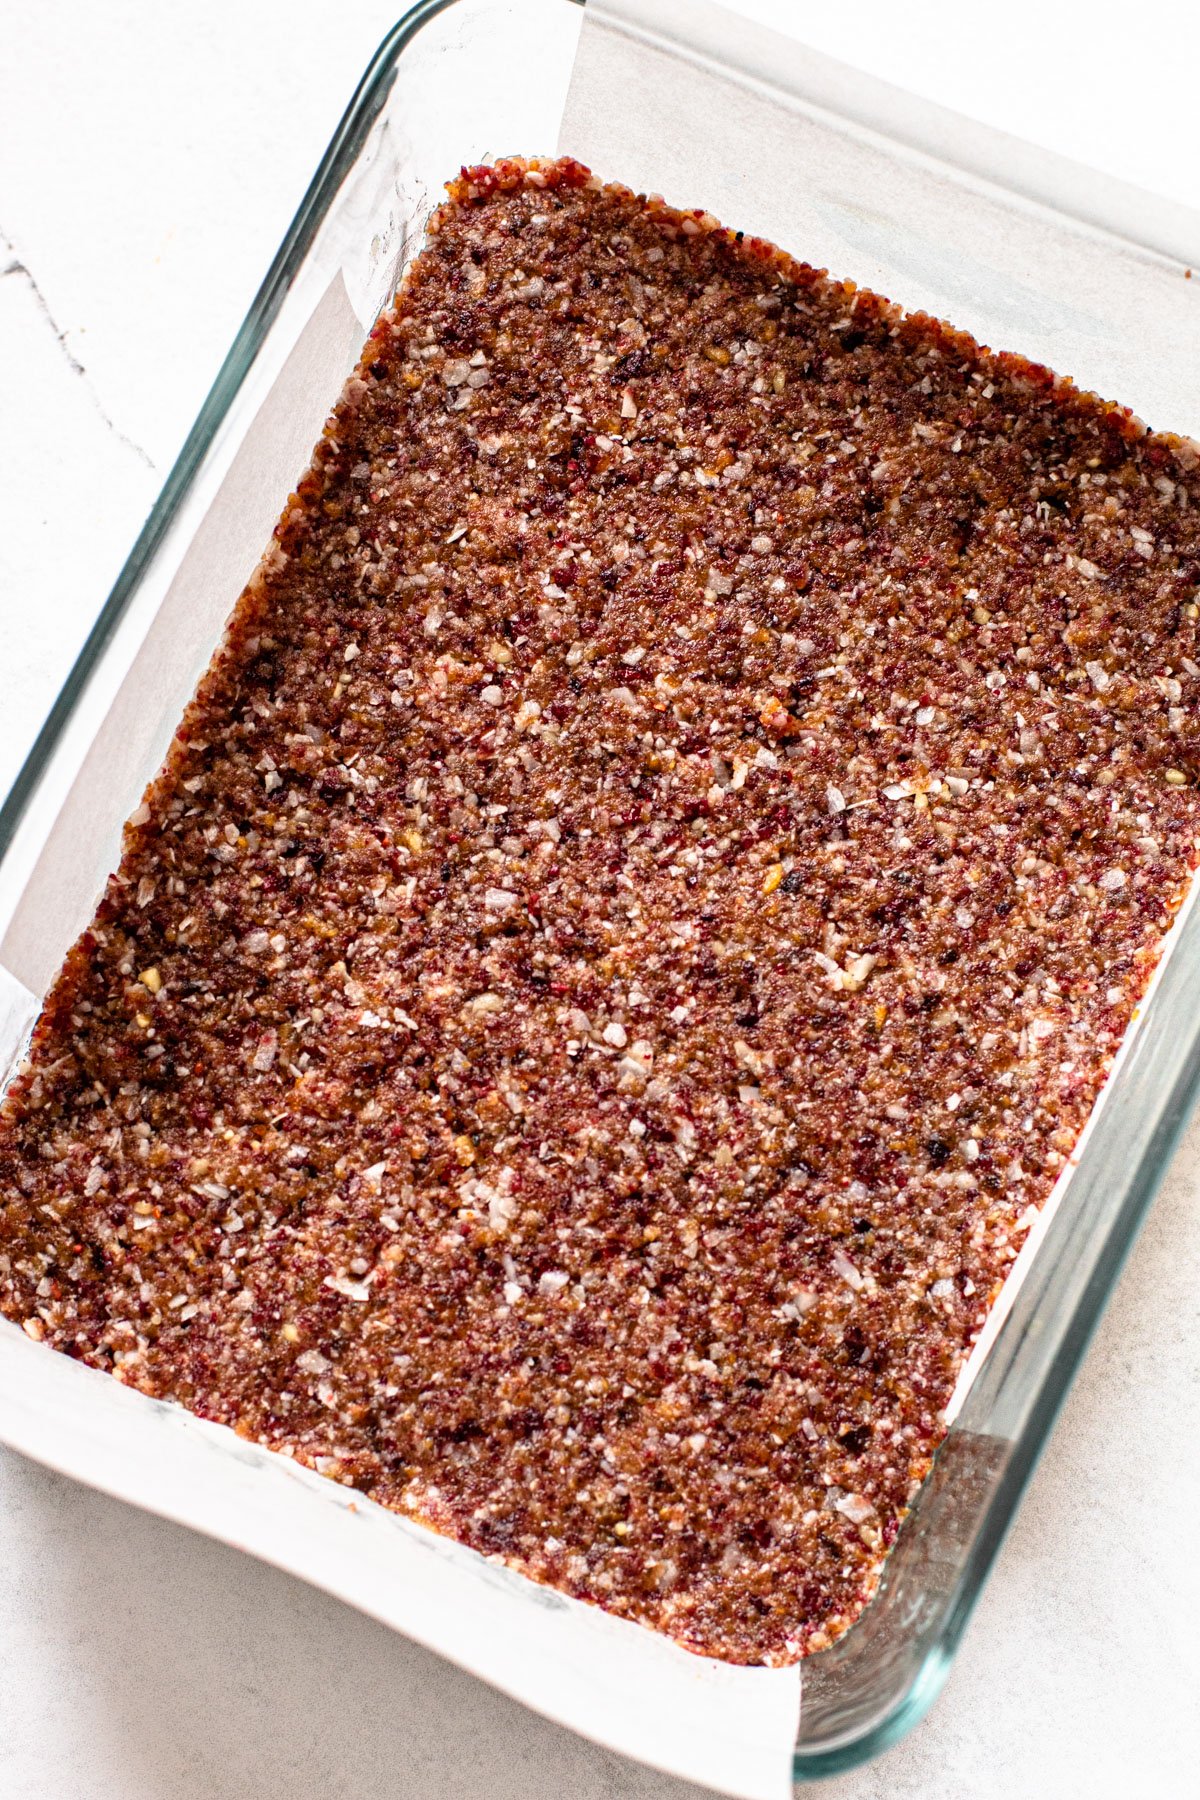 Cranberry coconut bars in a container.